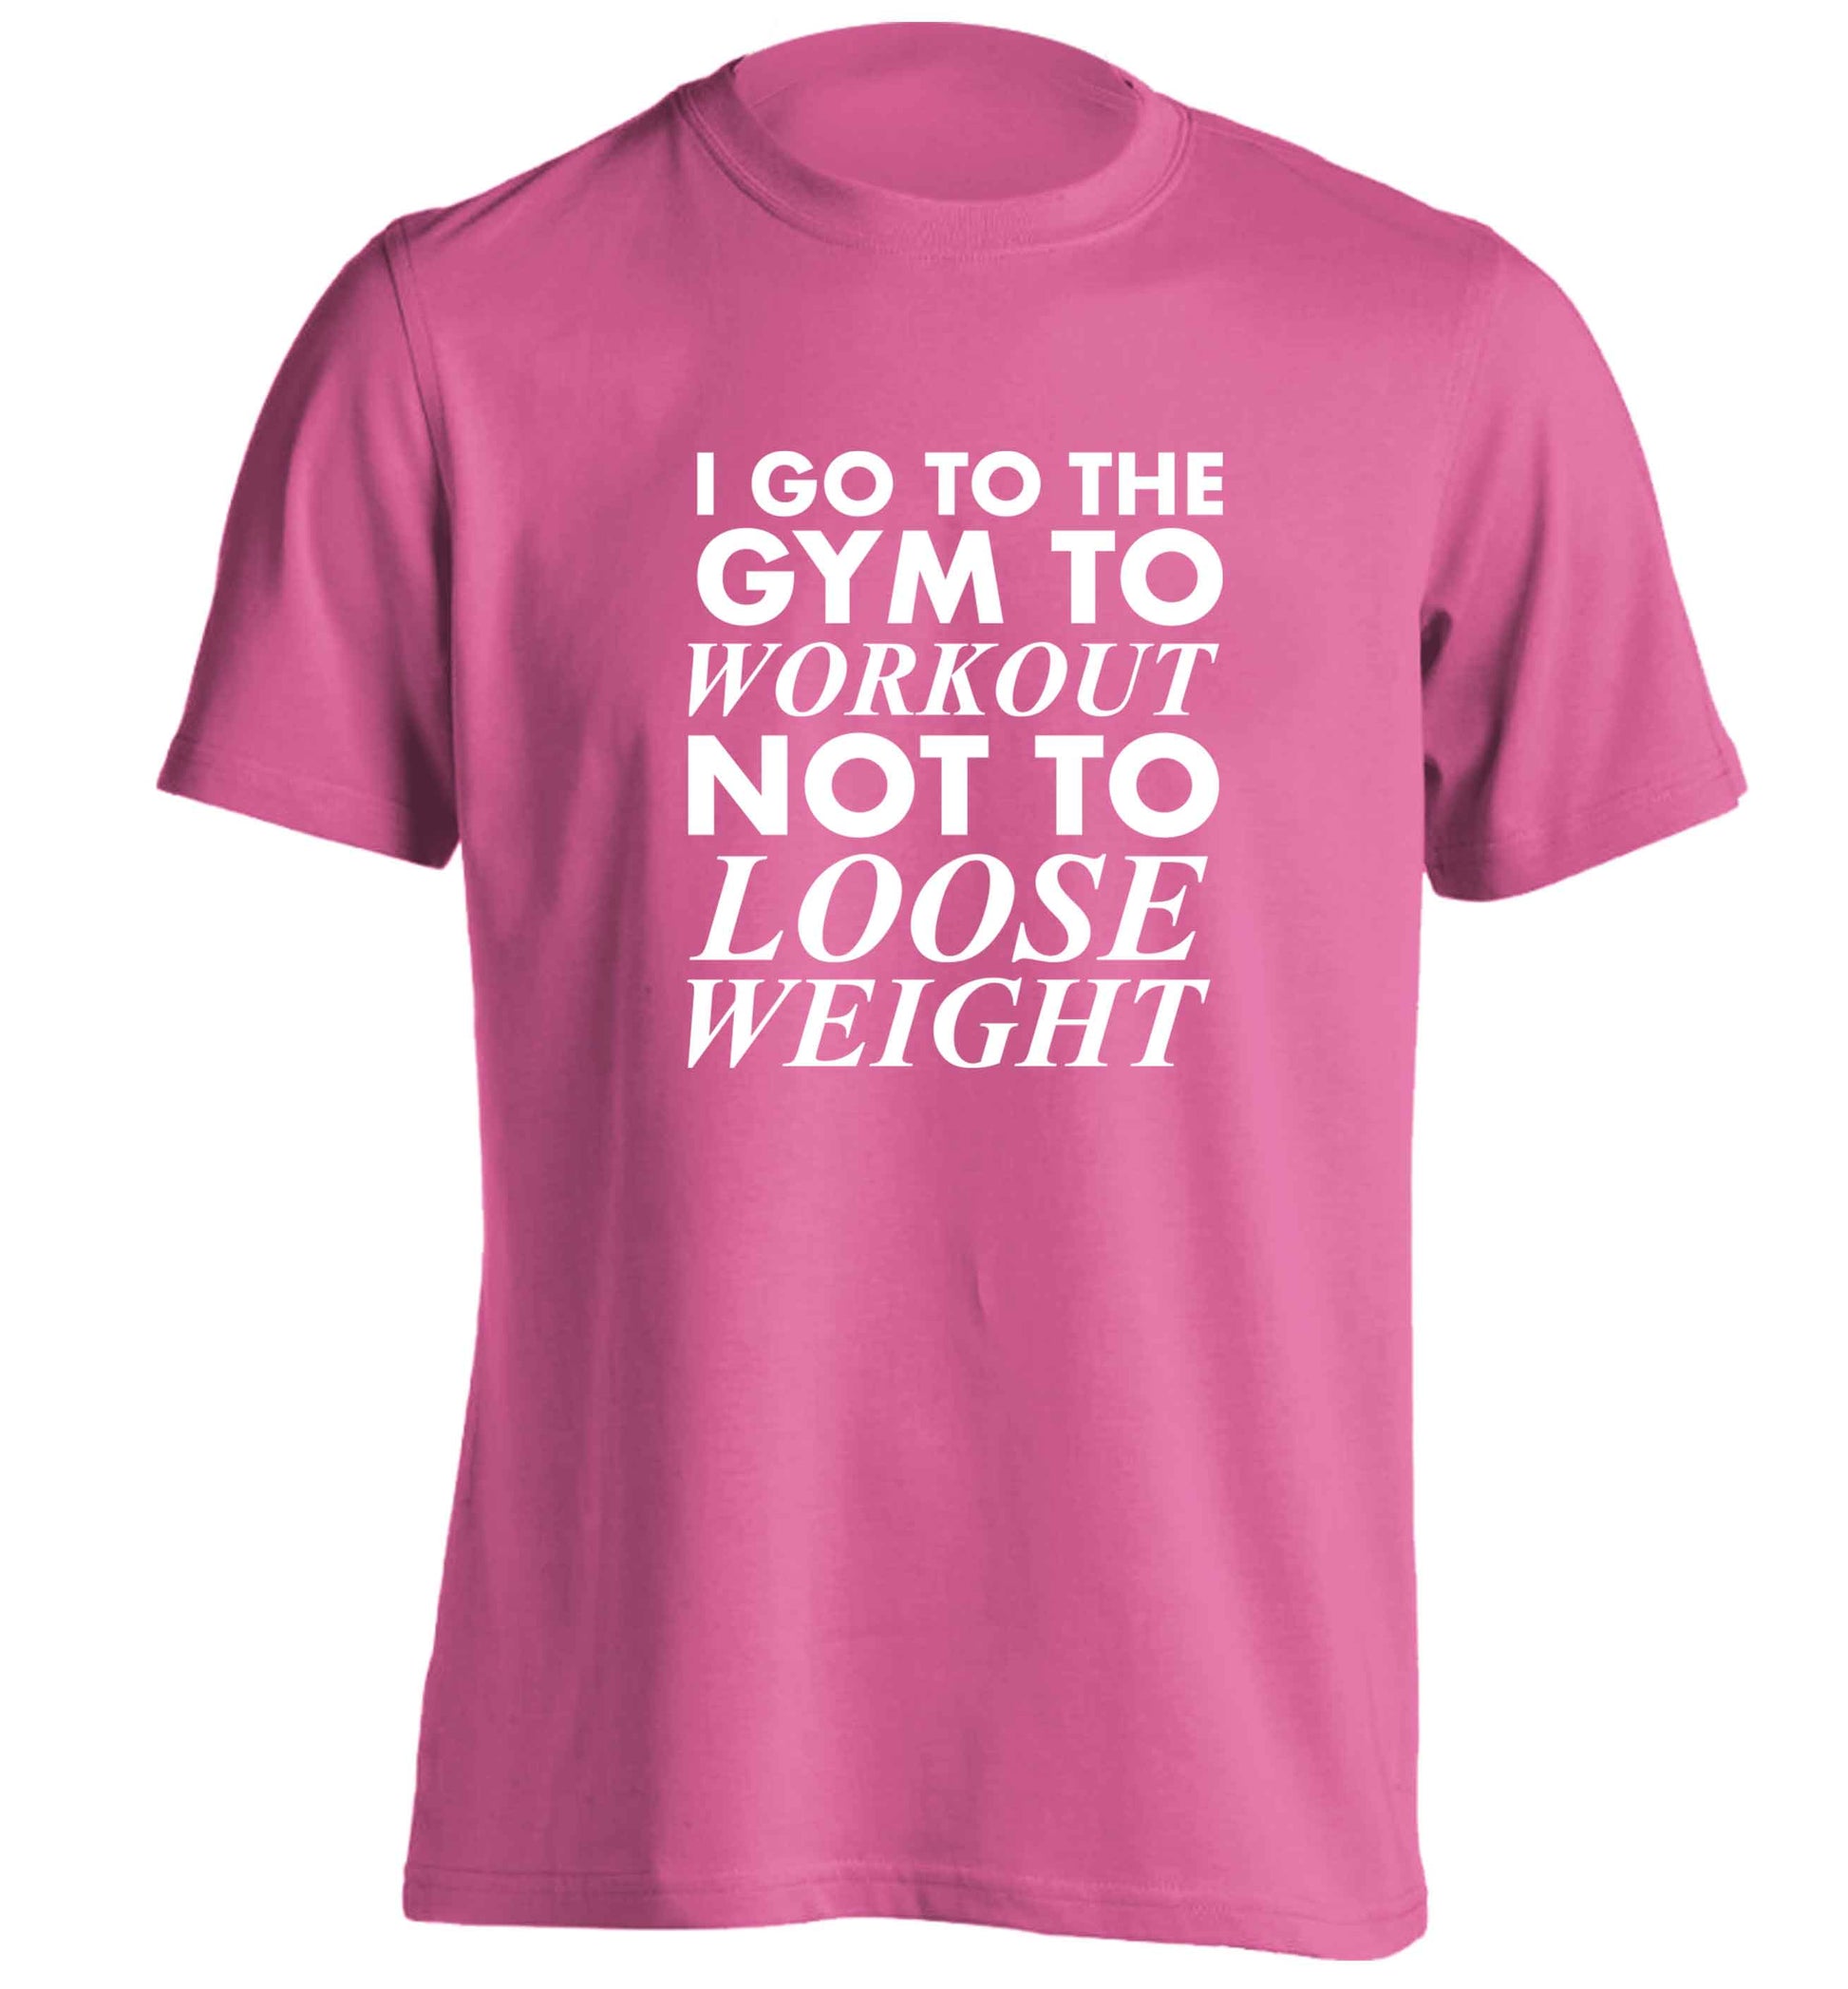 I go to the gym to workout not to loose weight adults unisex pink Tshirt 2XL